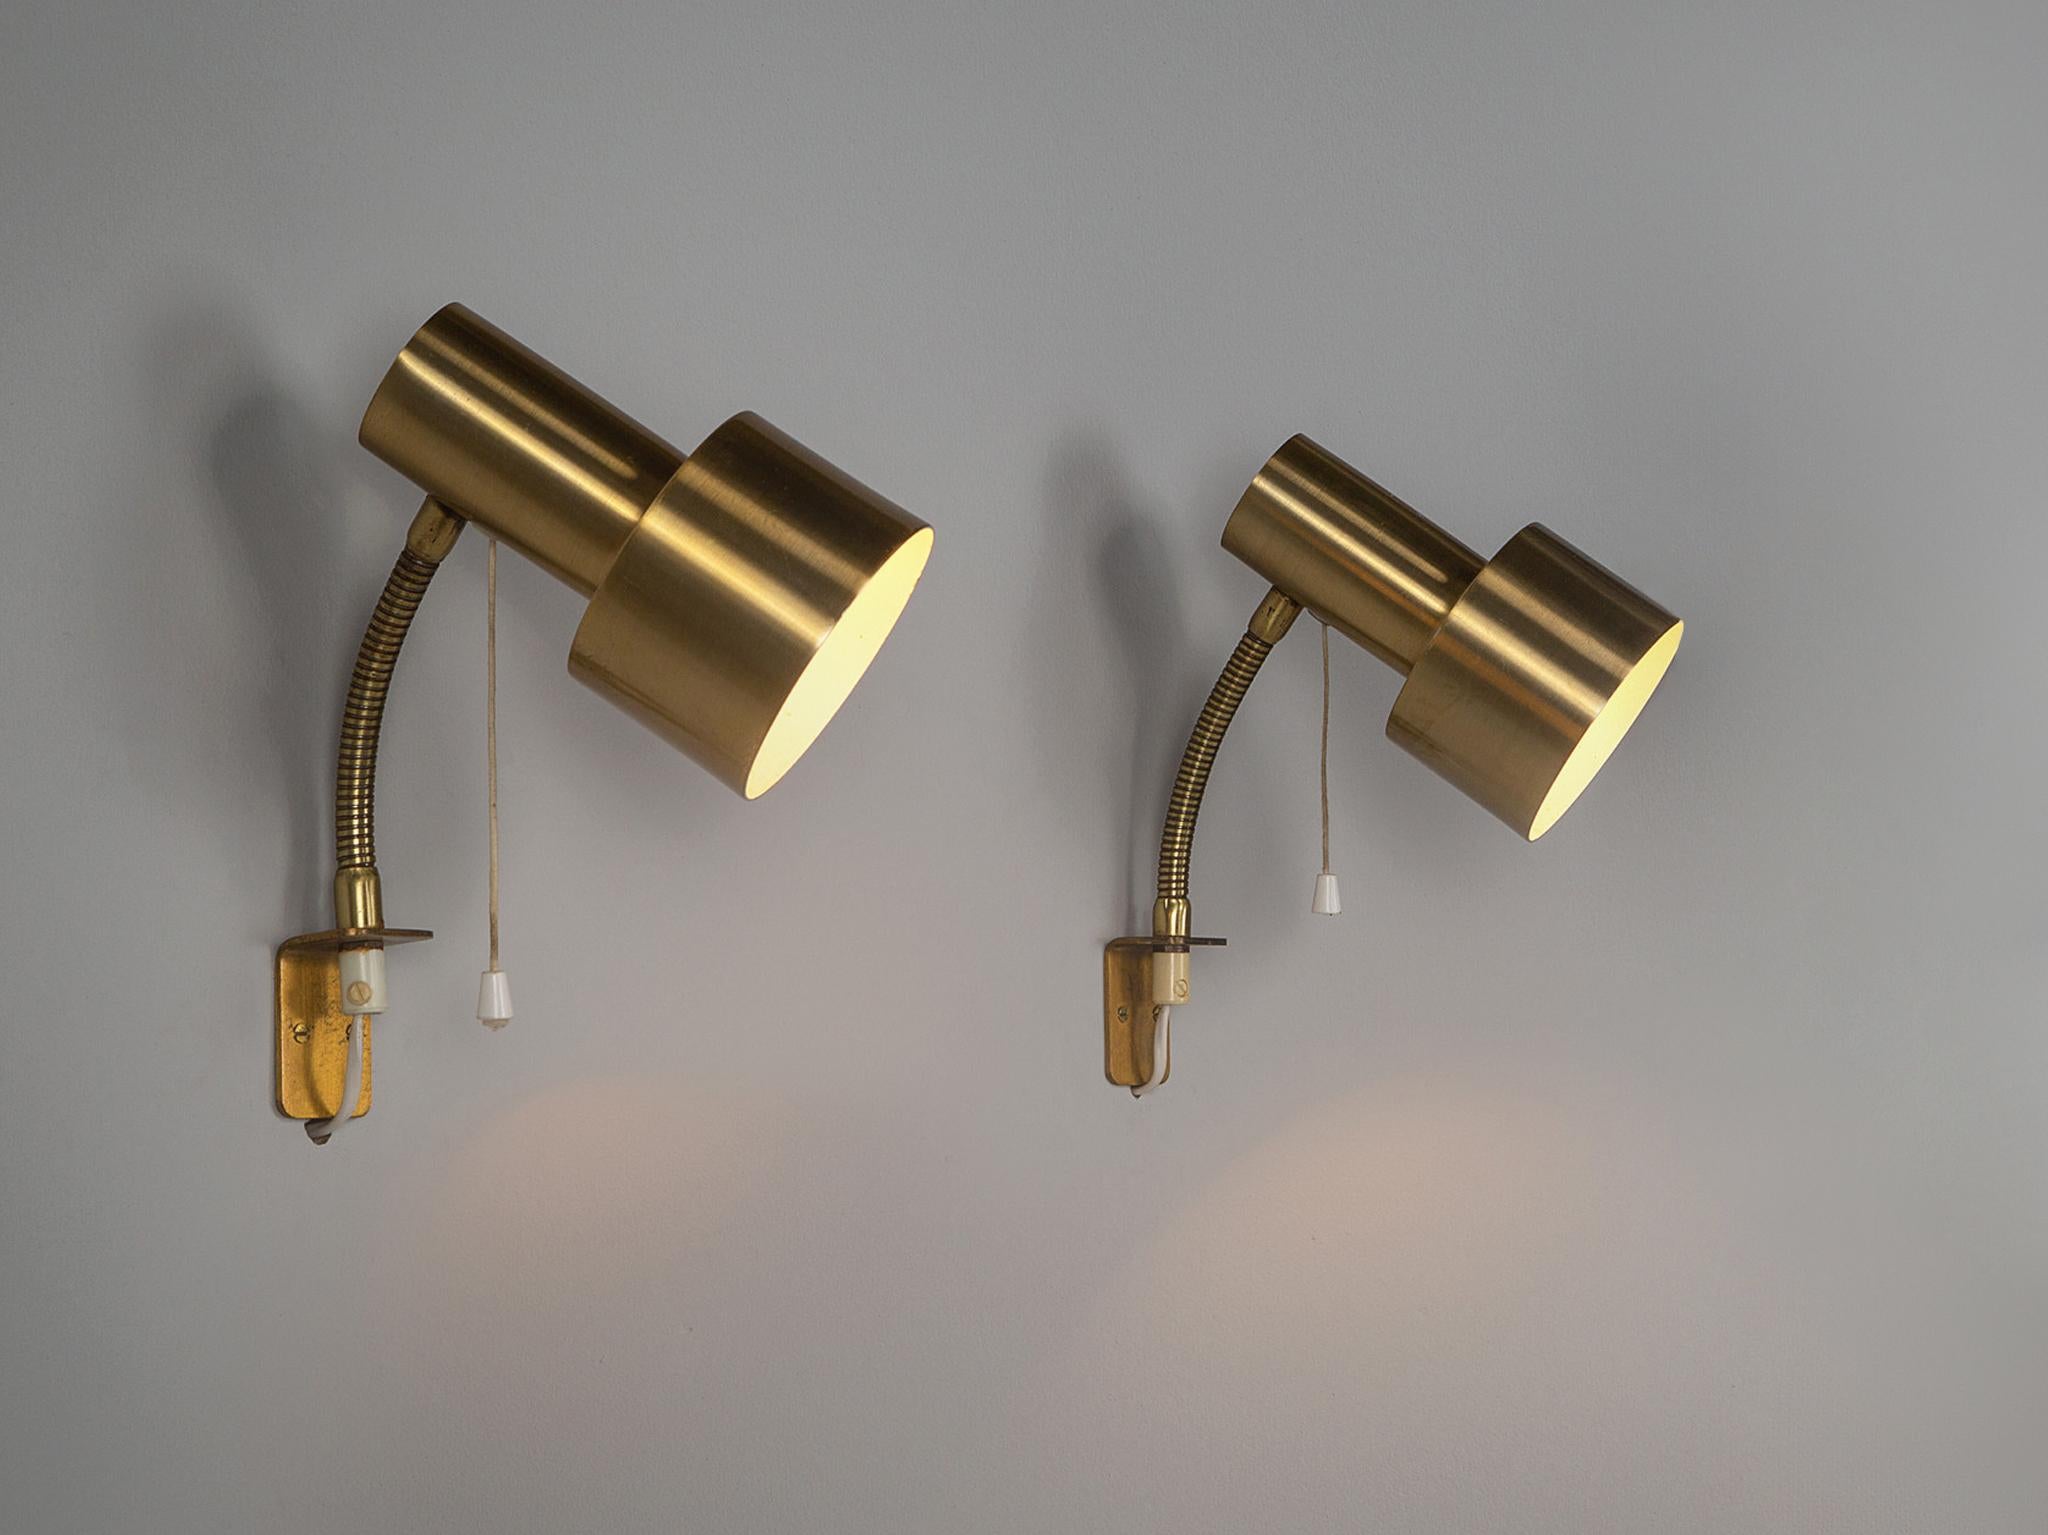 Wall lamps, brass, Sweden, 1960s.

Attractive and chic Swedish wall lamps with brass shades, adjustable stem and pull cords. A simplistic yet smart set of wall lamps.

Please note that we have more in stock. These items are in good, used condition.